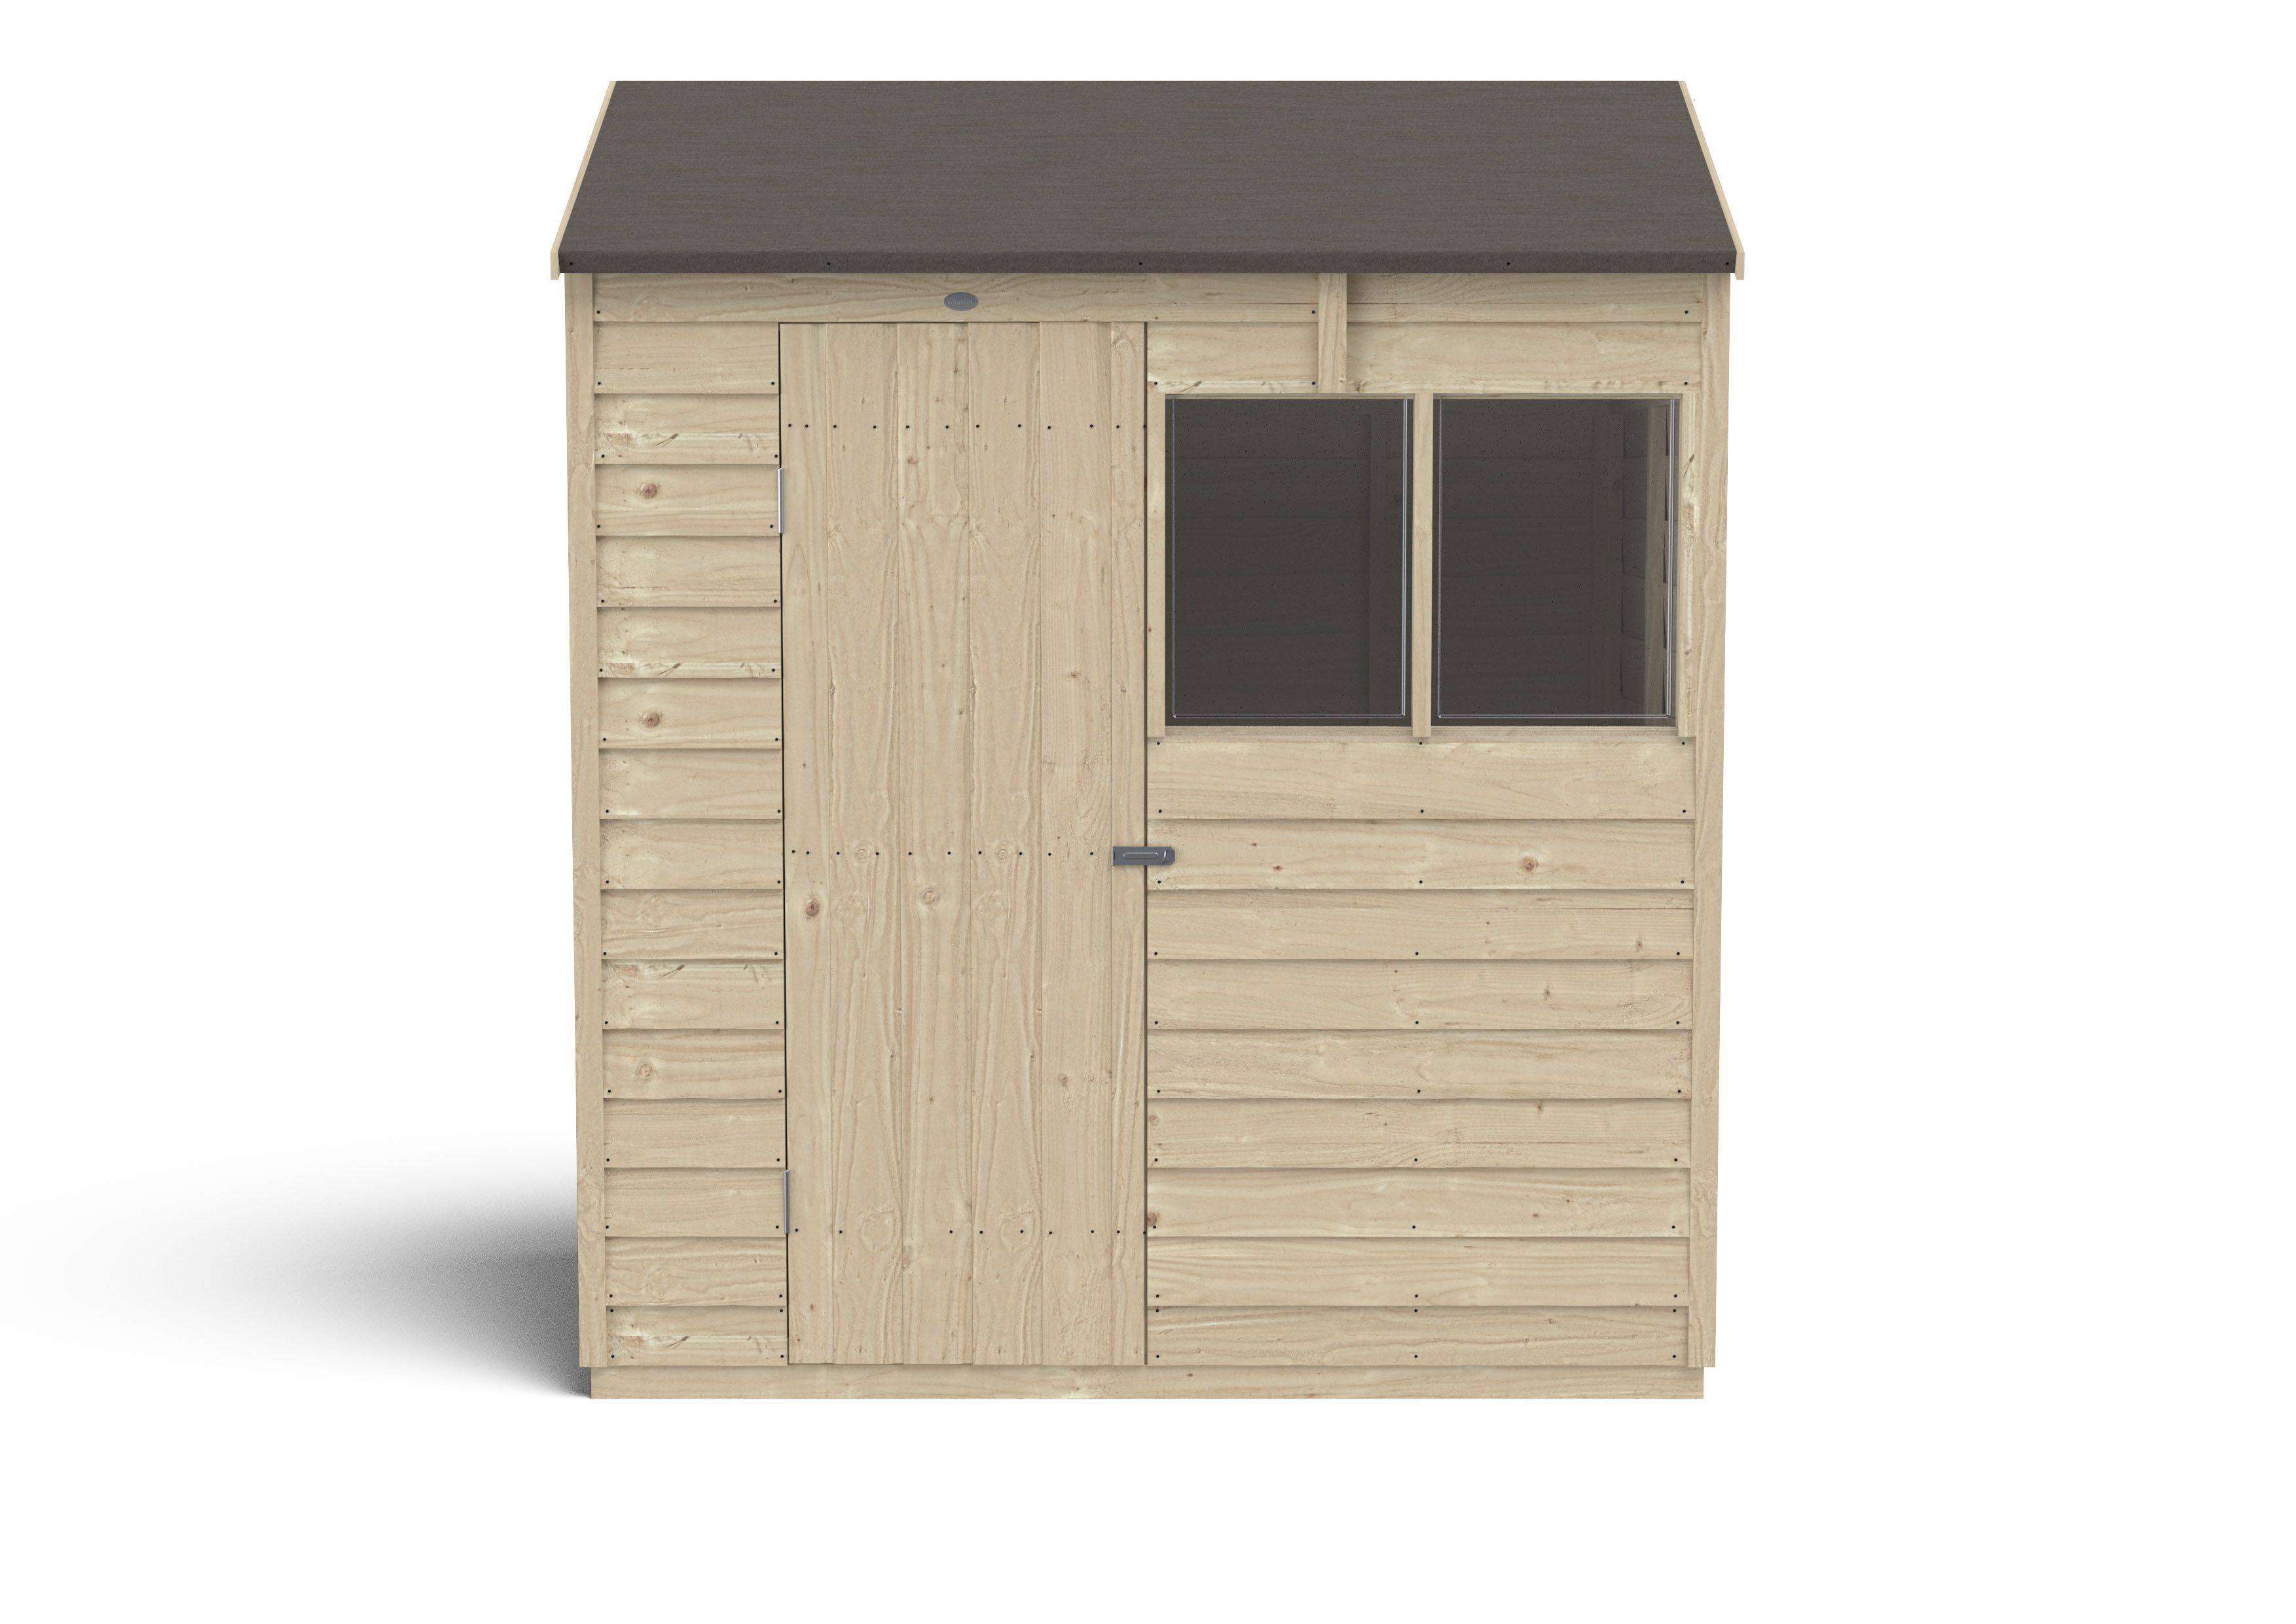 Forest Garden Overlap 6x4 ft Reverse apex Wooden Pressure treated Shed with floor & 2 windows - Assembly service included